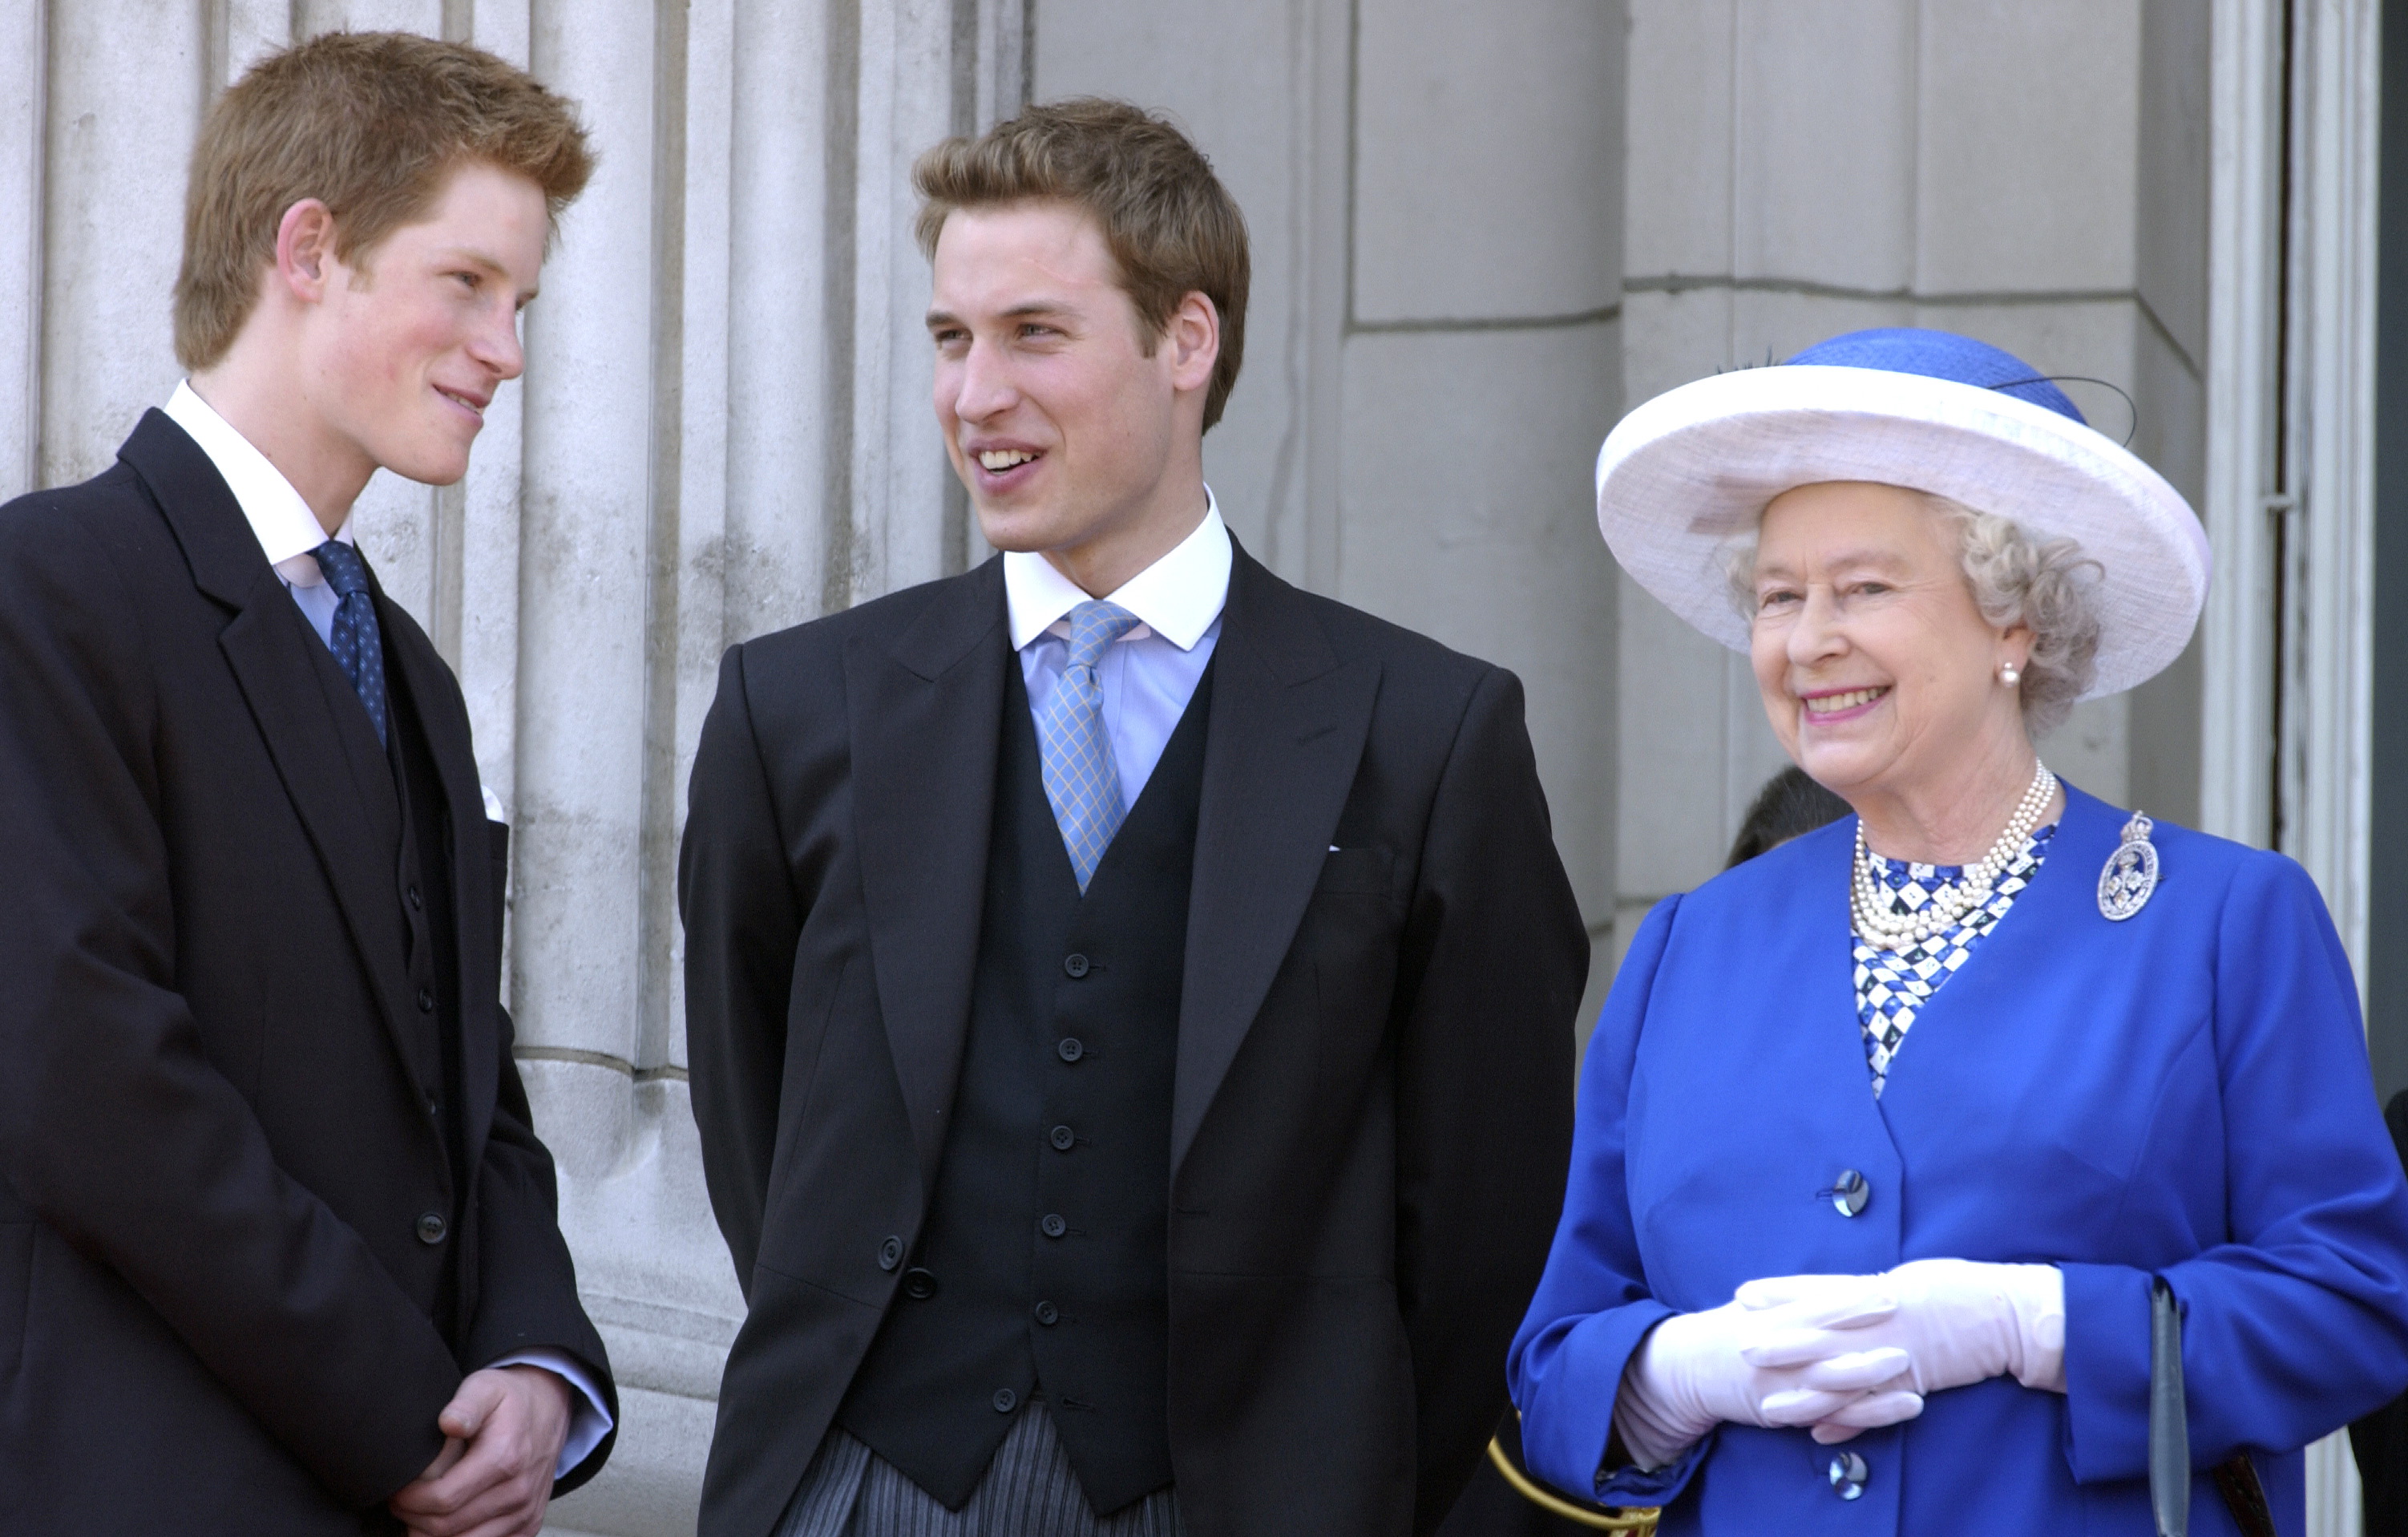 Prince William And Harry And Queen